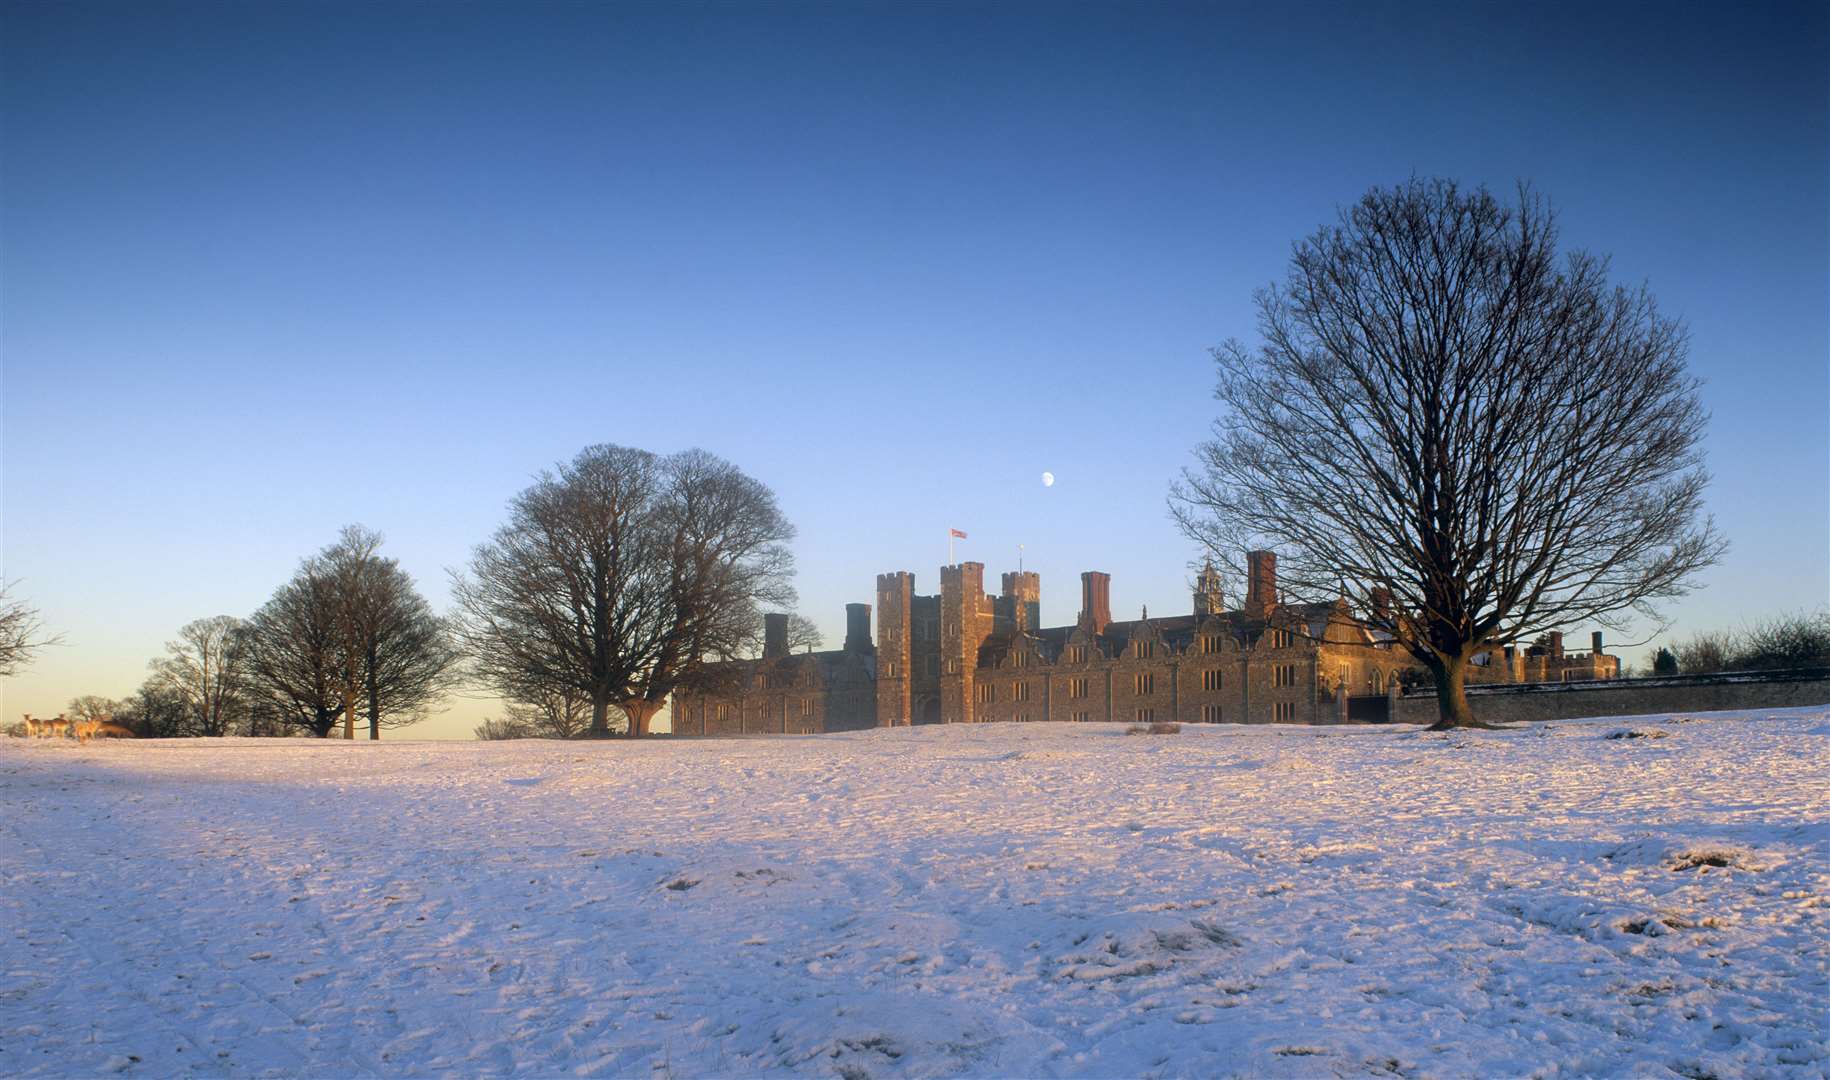 Take in views of Knole deer park this Christmas. Picture: © National Trust Images / David Sellman